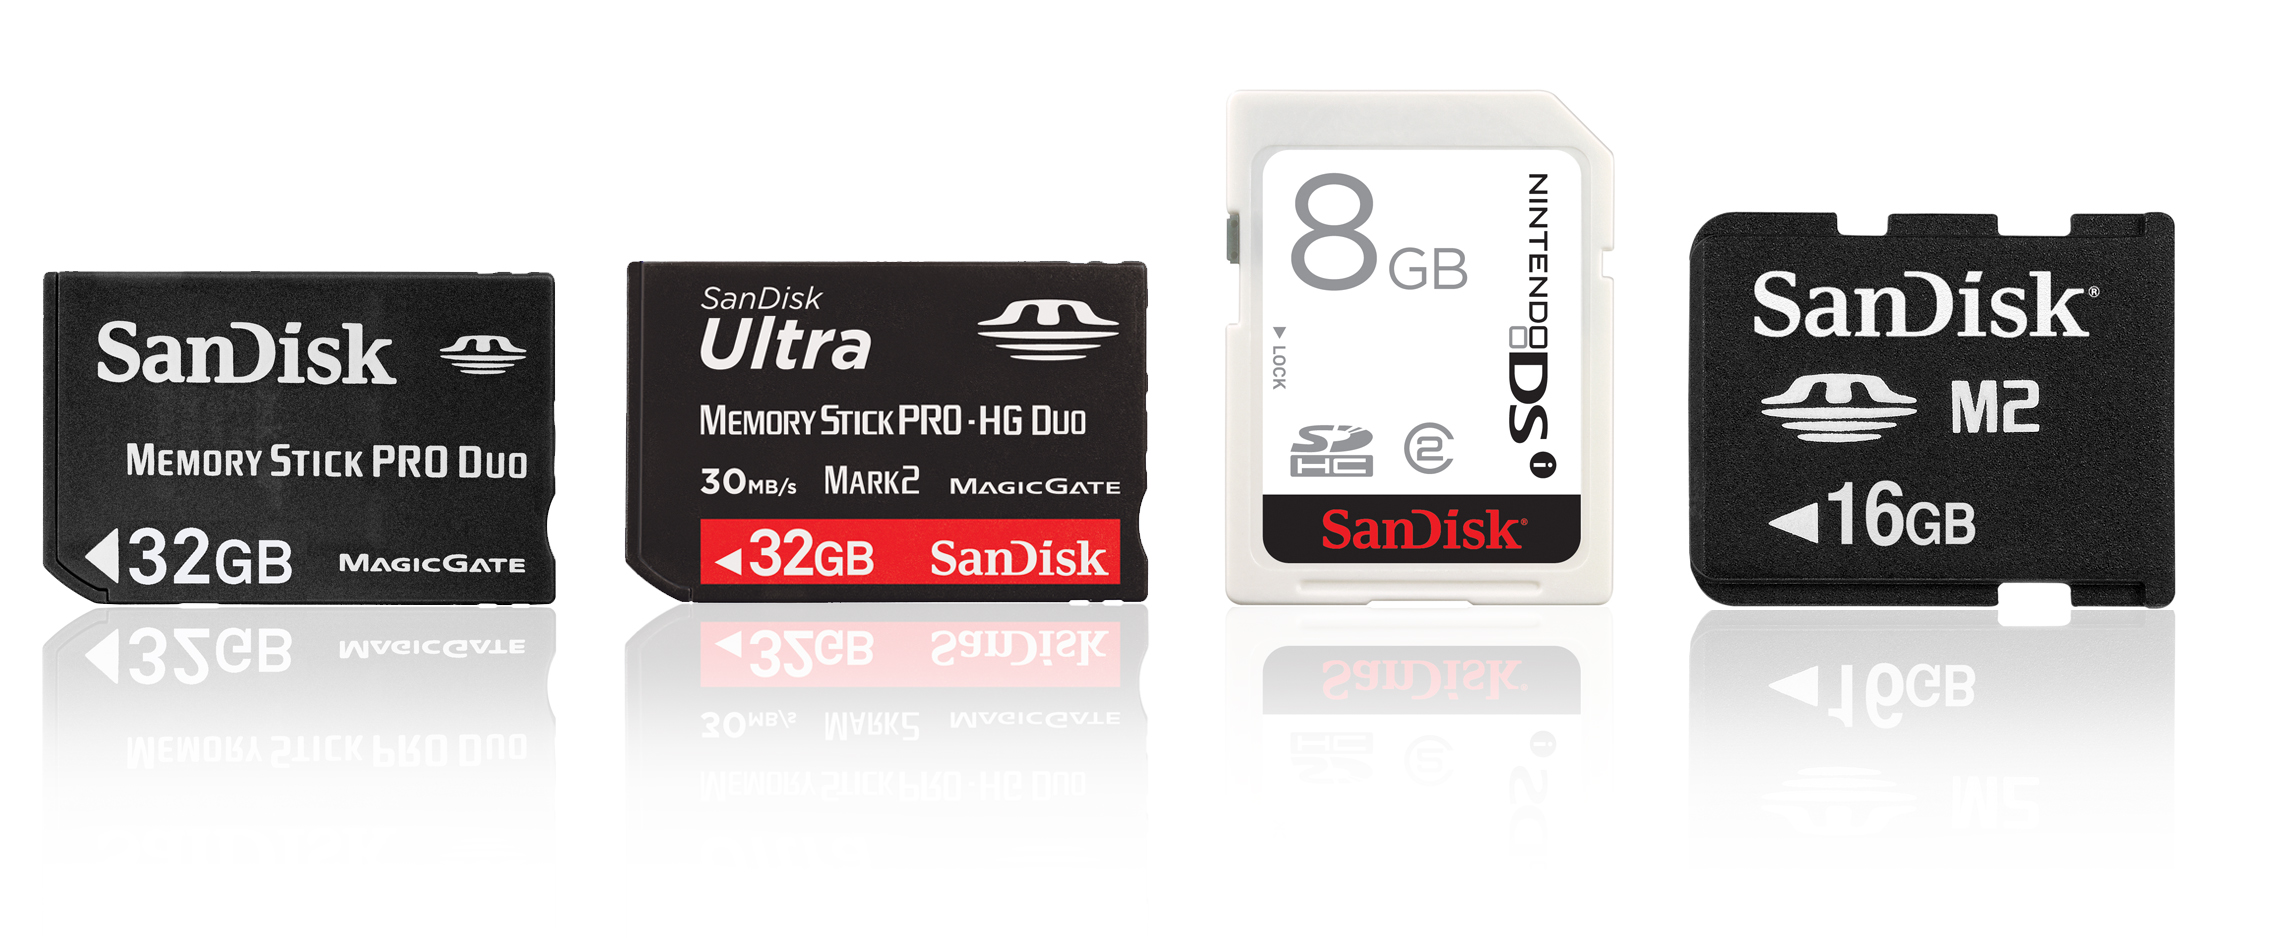 SanDisk announces new 16GB memory card in time for Sony PSP Go